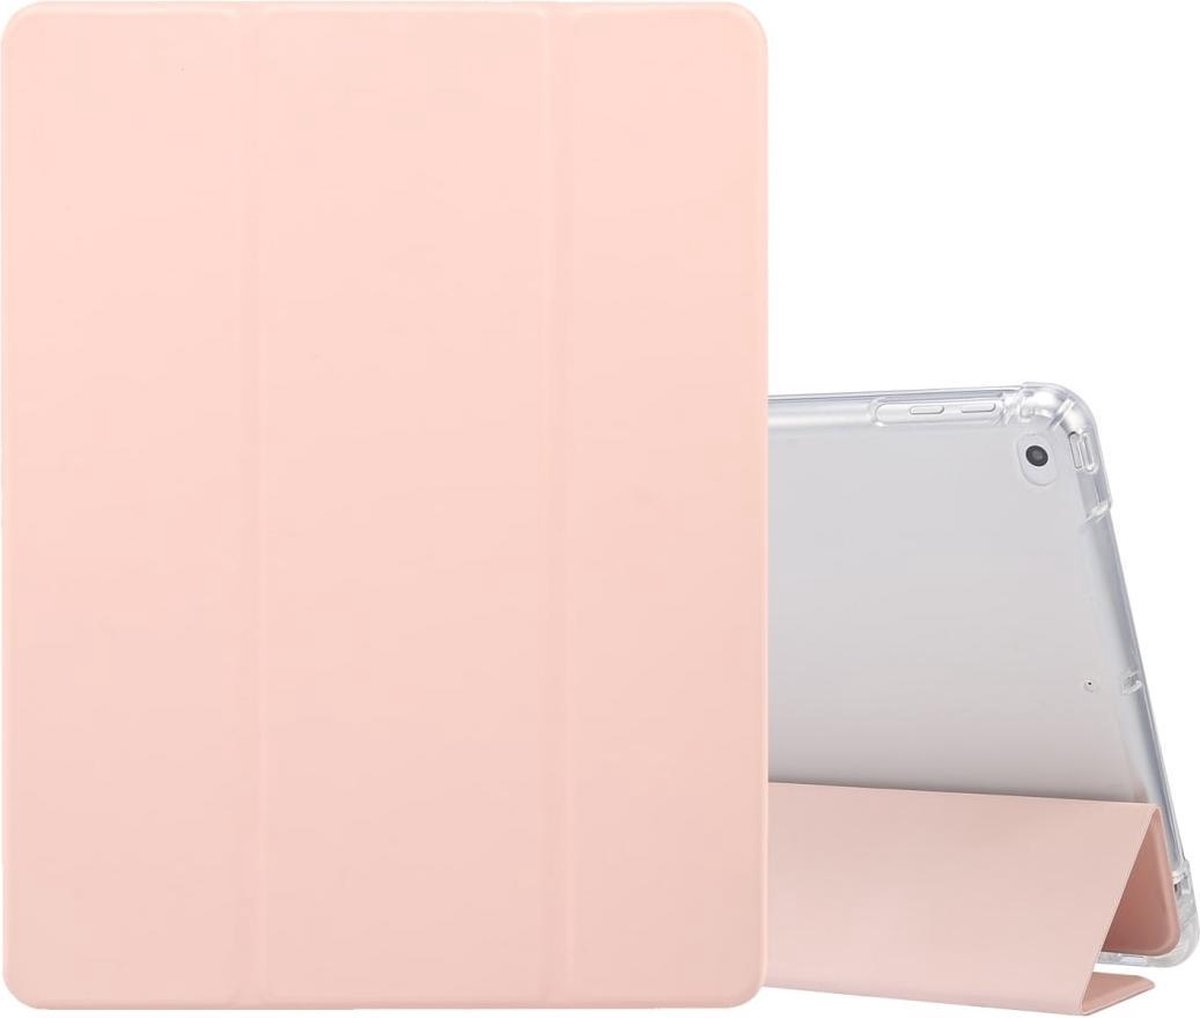 FONU Shockproof Bookcase Hoes iPad Air 1 2013 - 9.7 inch - Roze